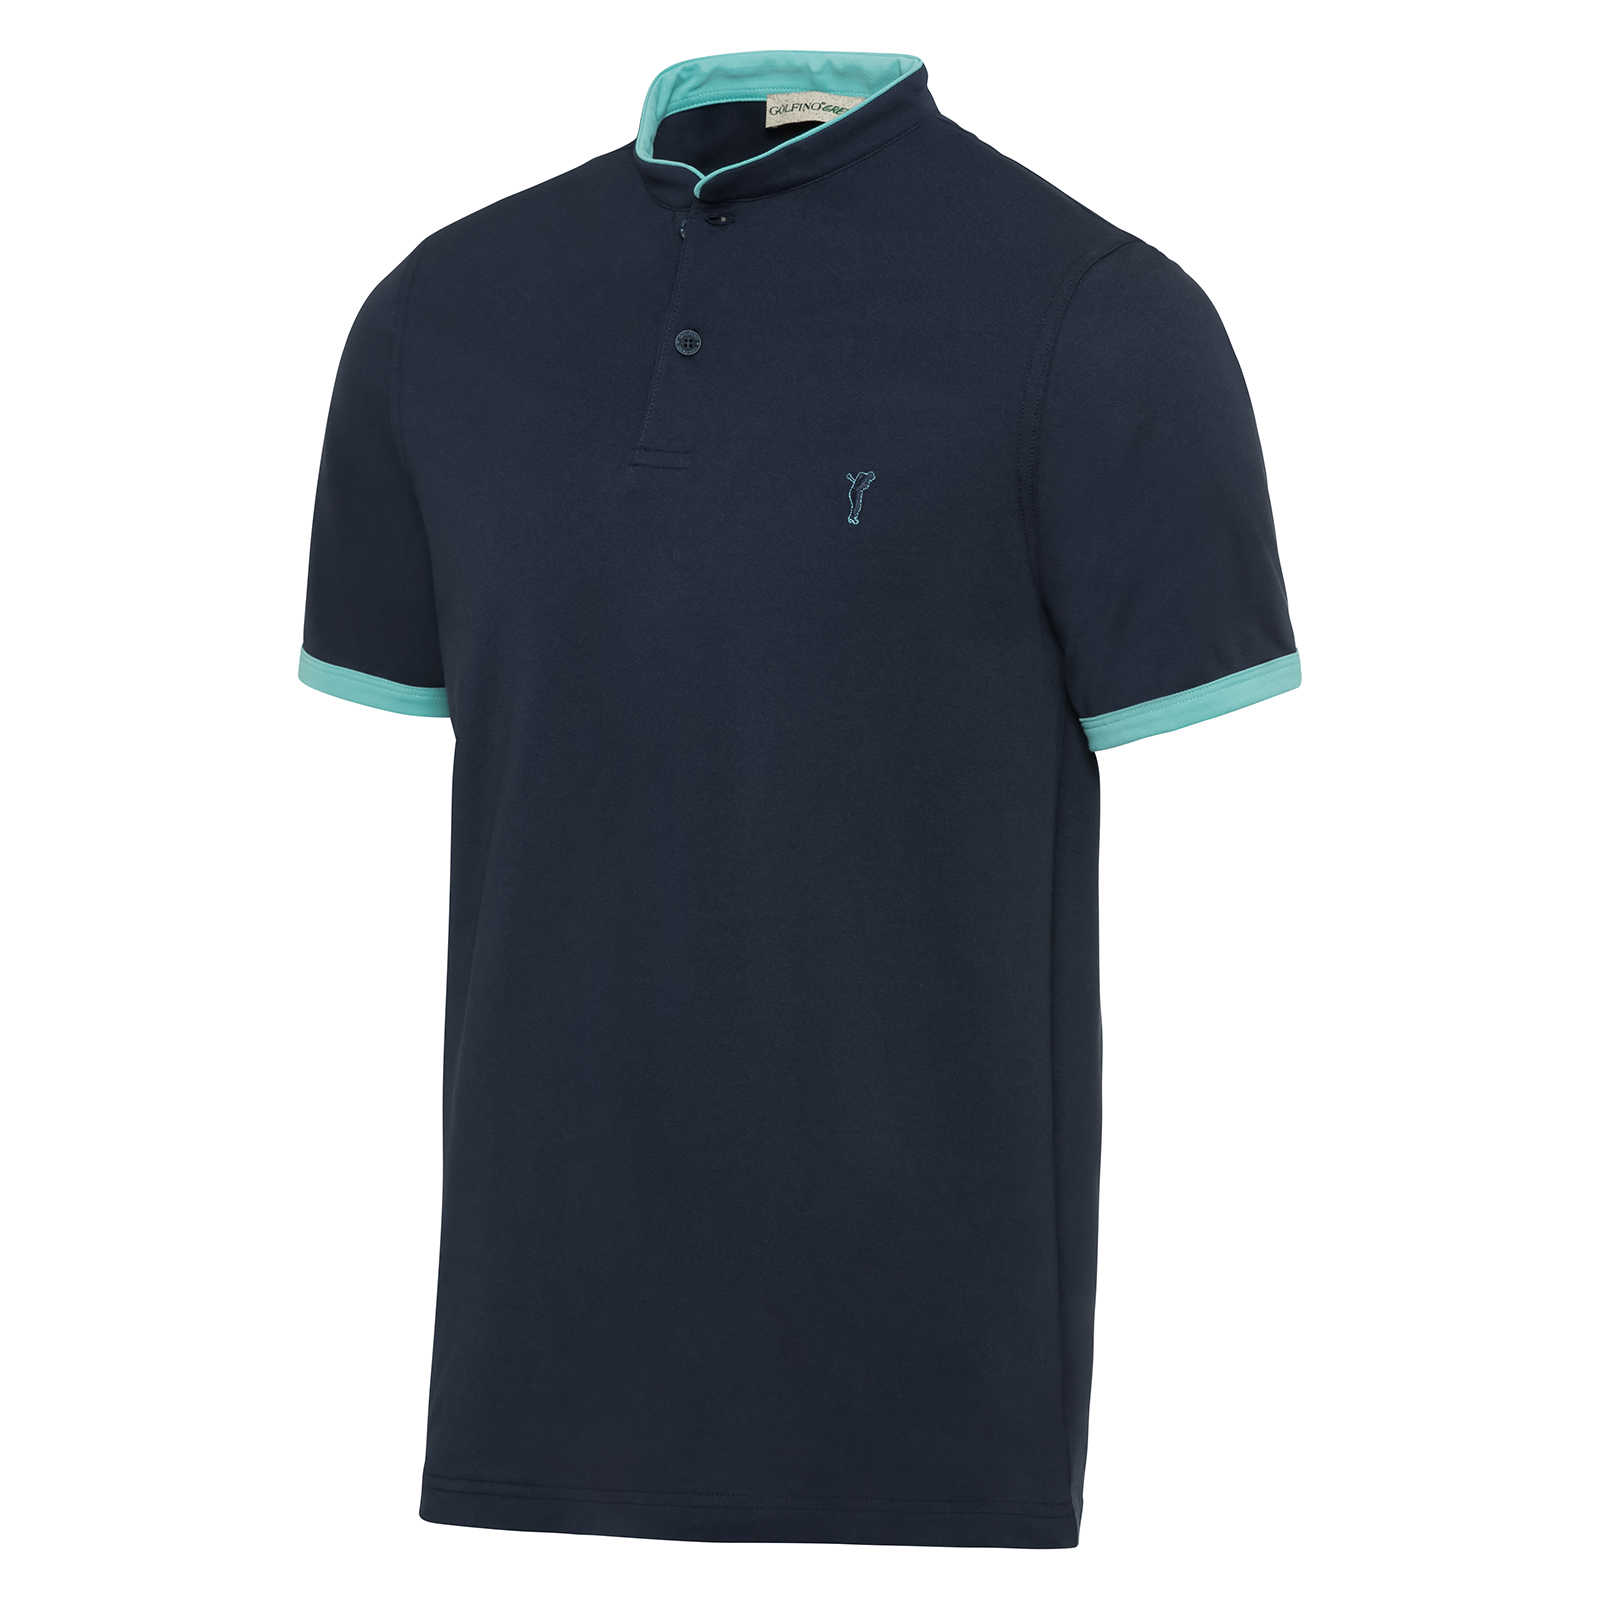 Men's short-sleeved golf polo shirt with stylish stand-up collar